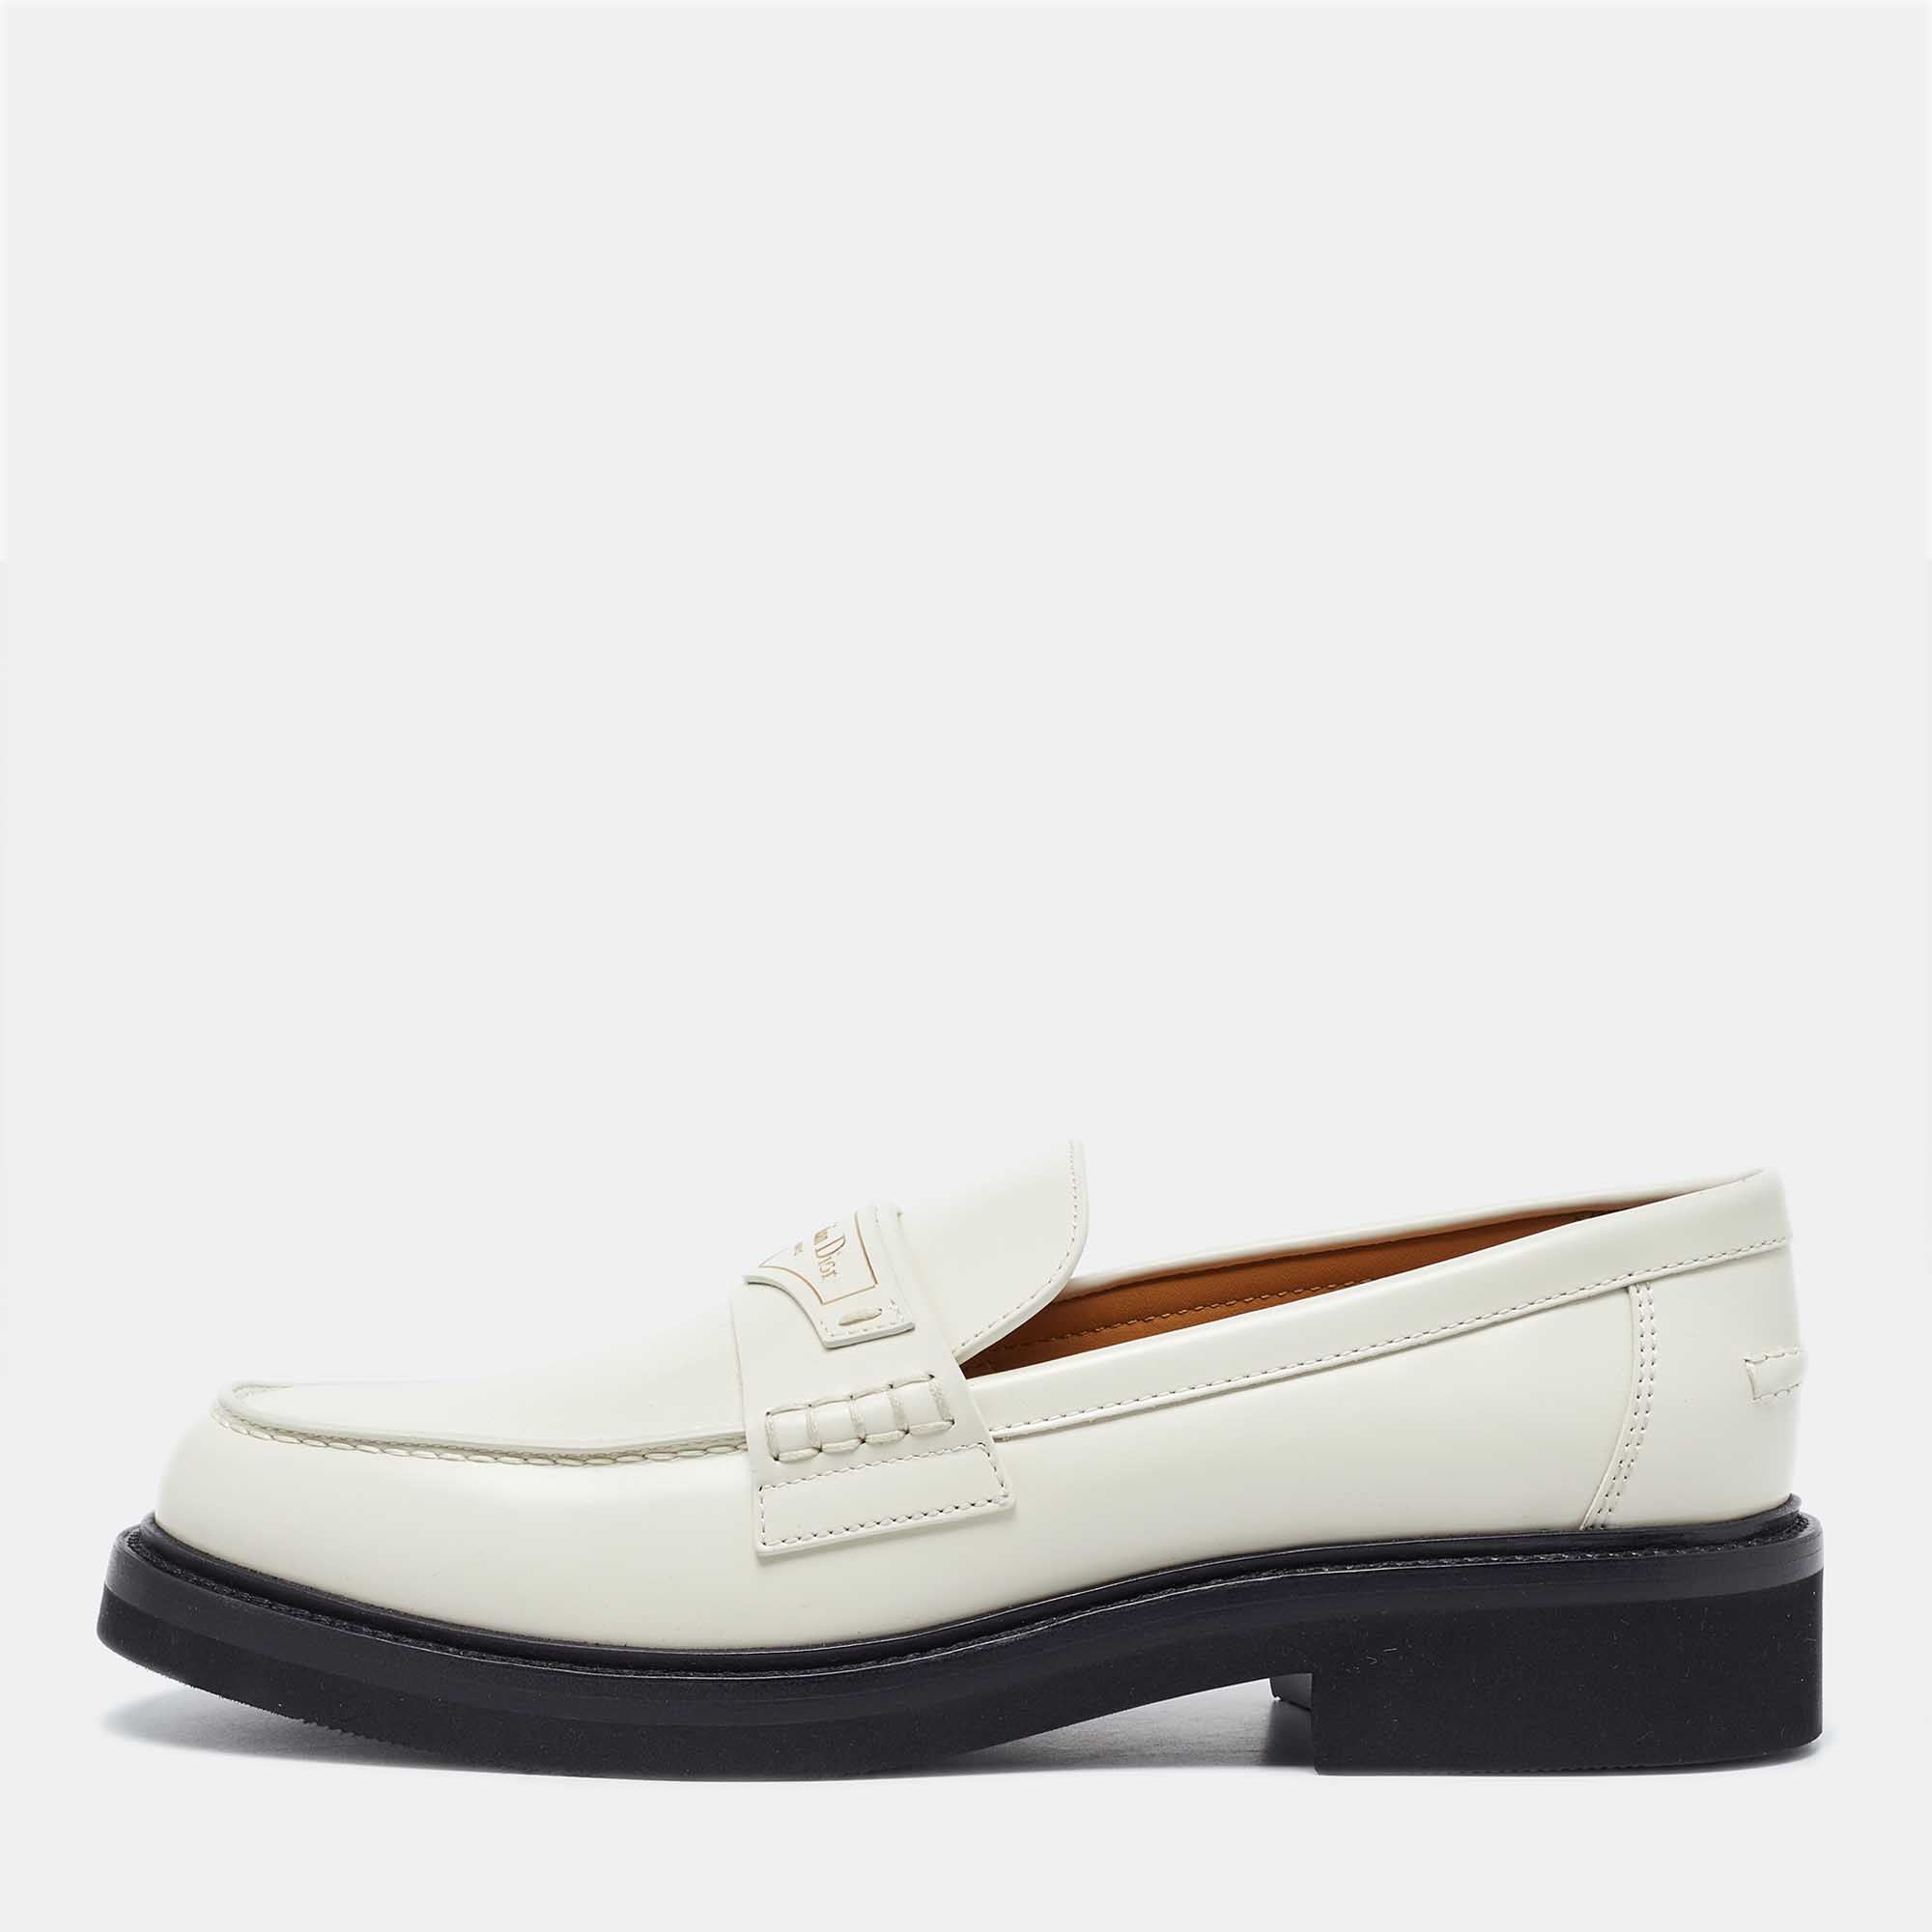 Dior white leather boy slip on loafers size 40